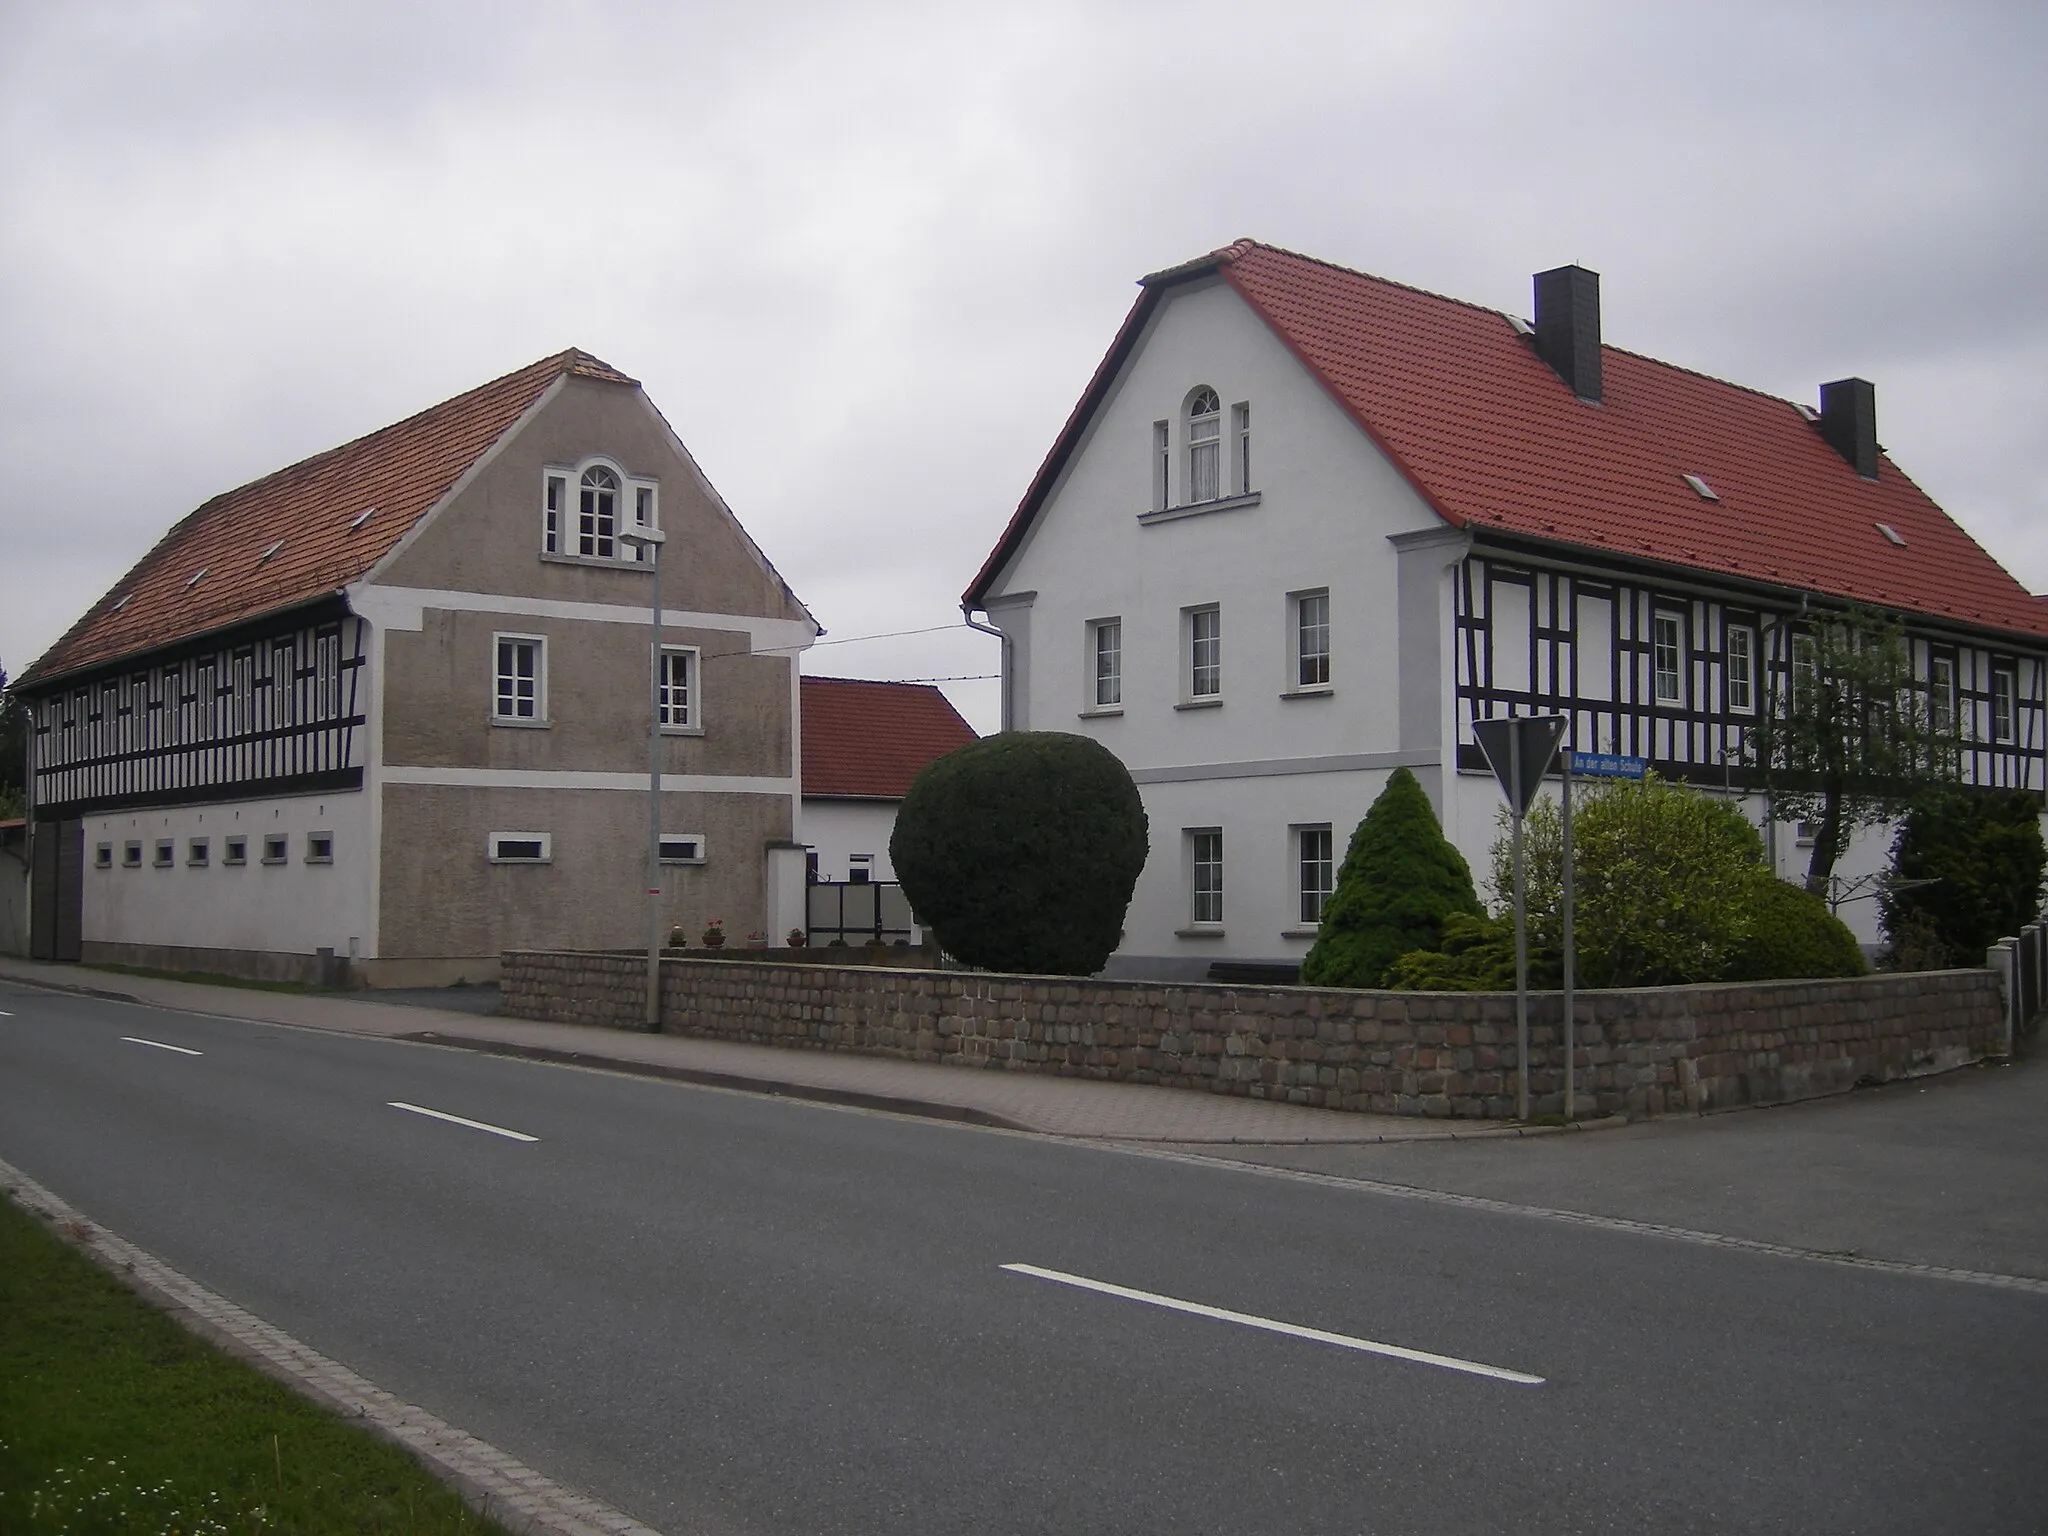 Photo showing: Estate in Schloßig, district of Schmölln near Gera/Thuringia (Germany)